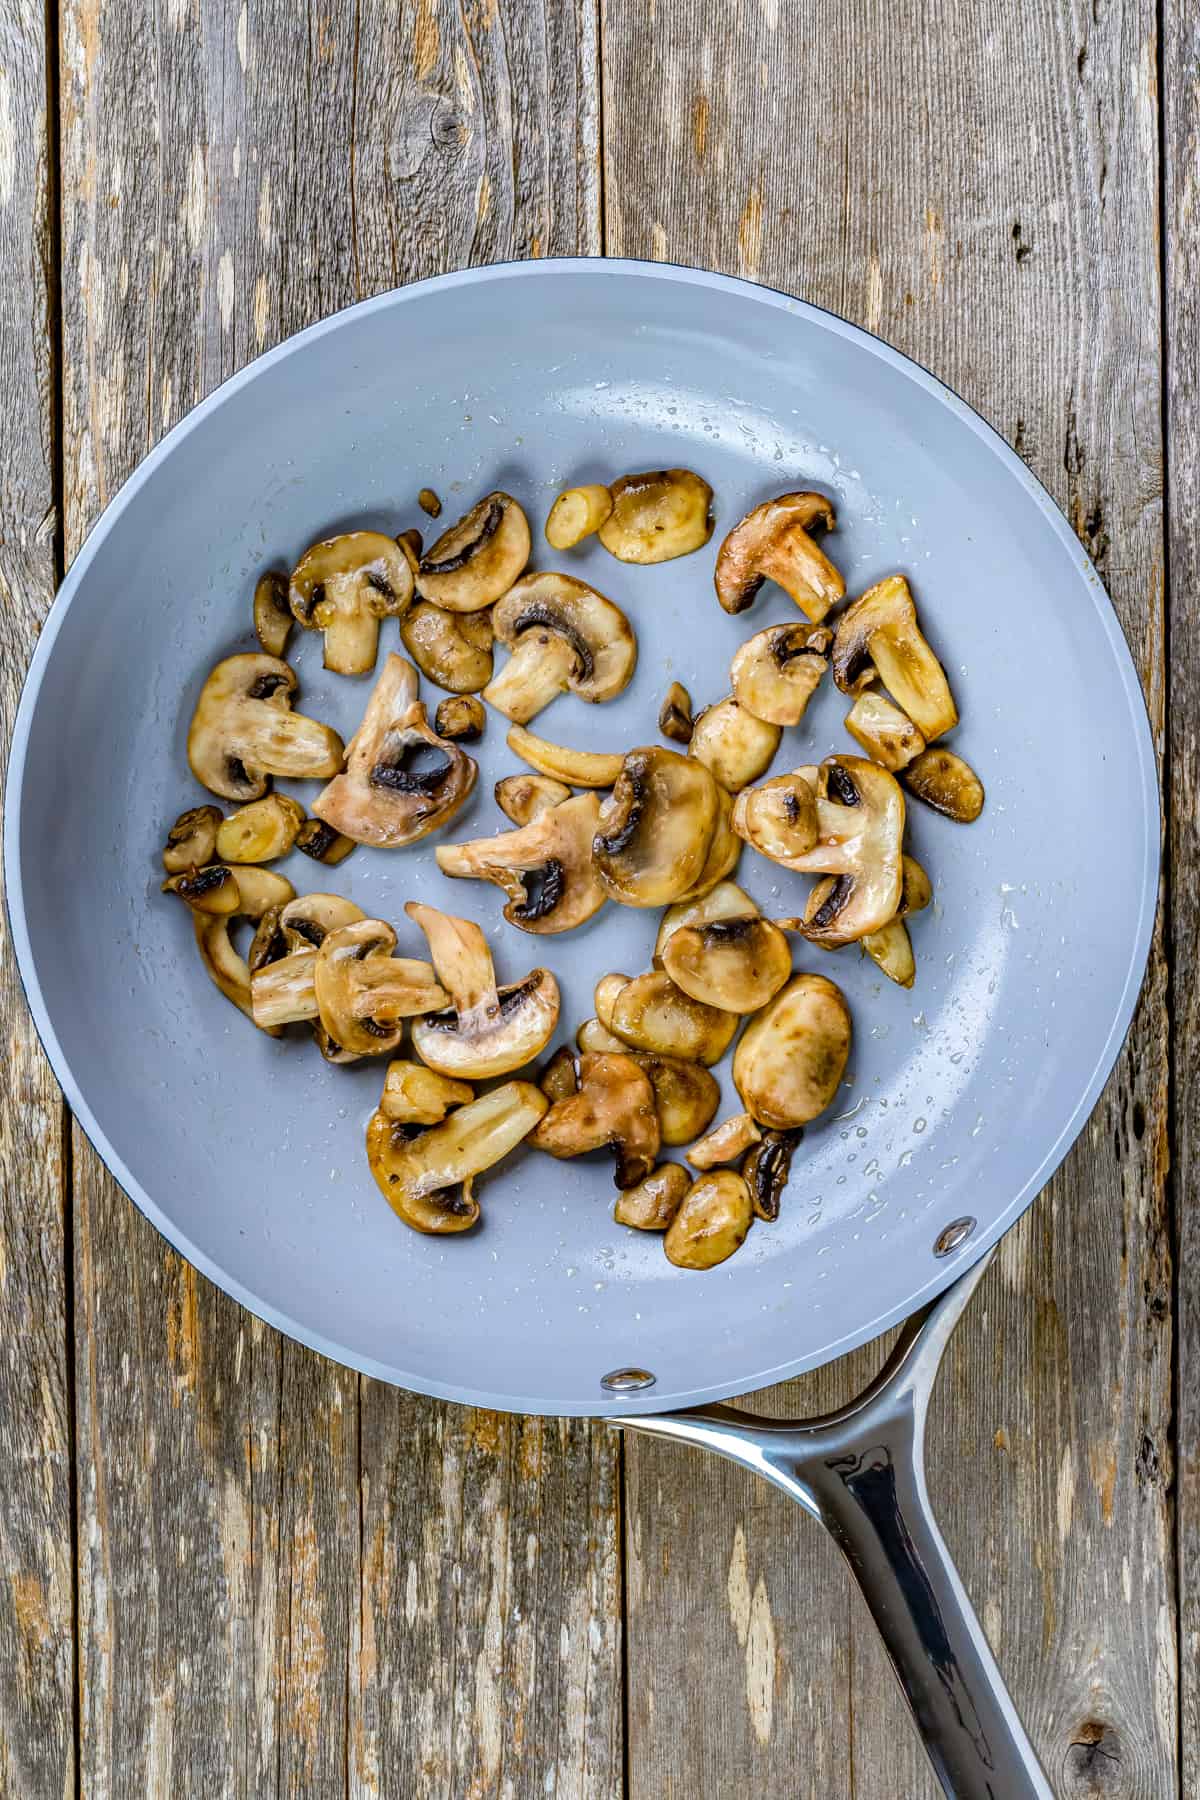 Mushrooms cooking in a skillet.